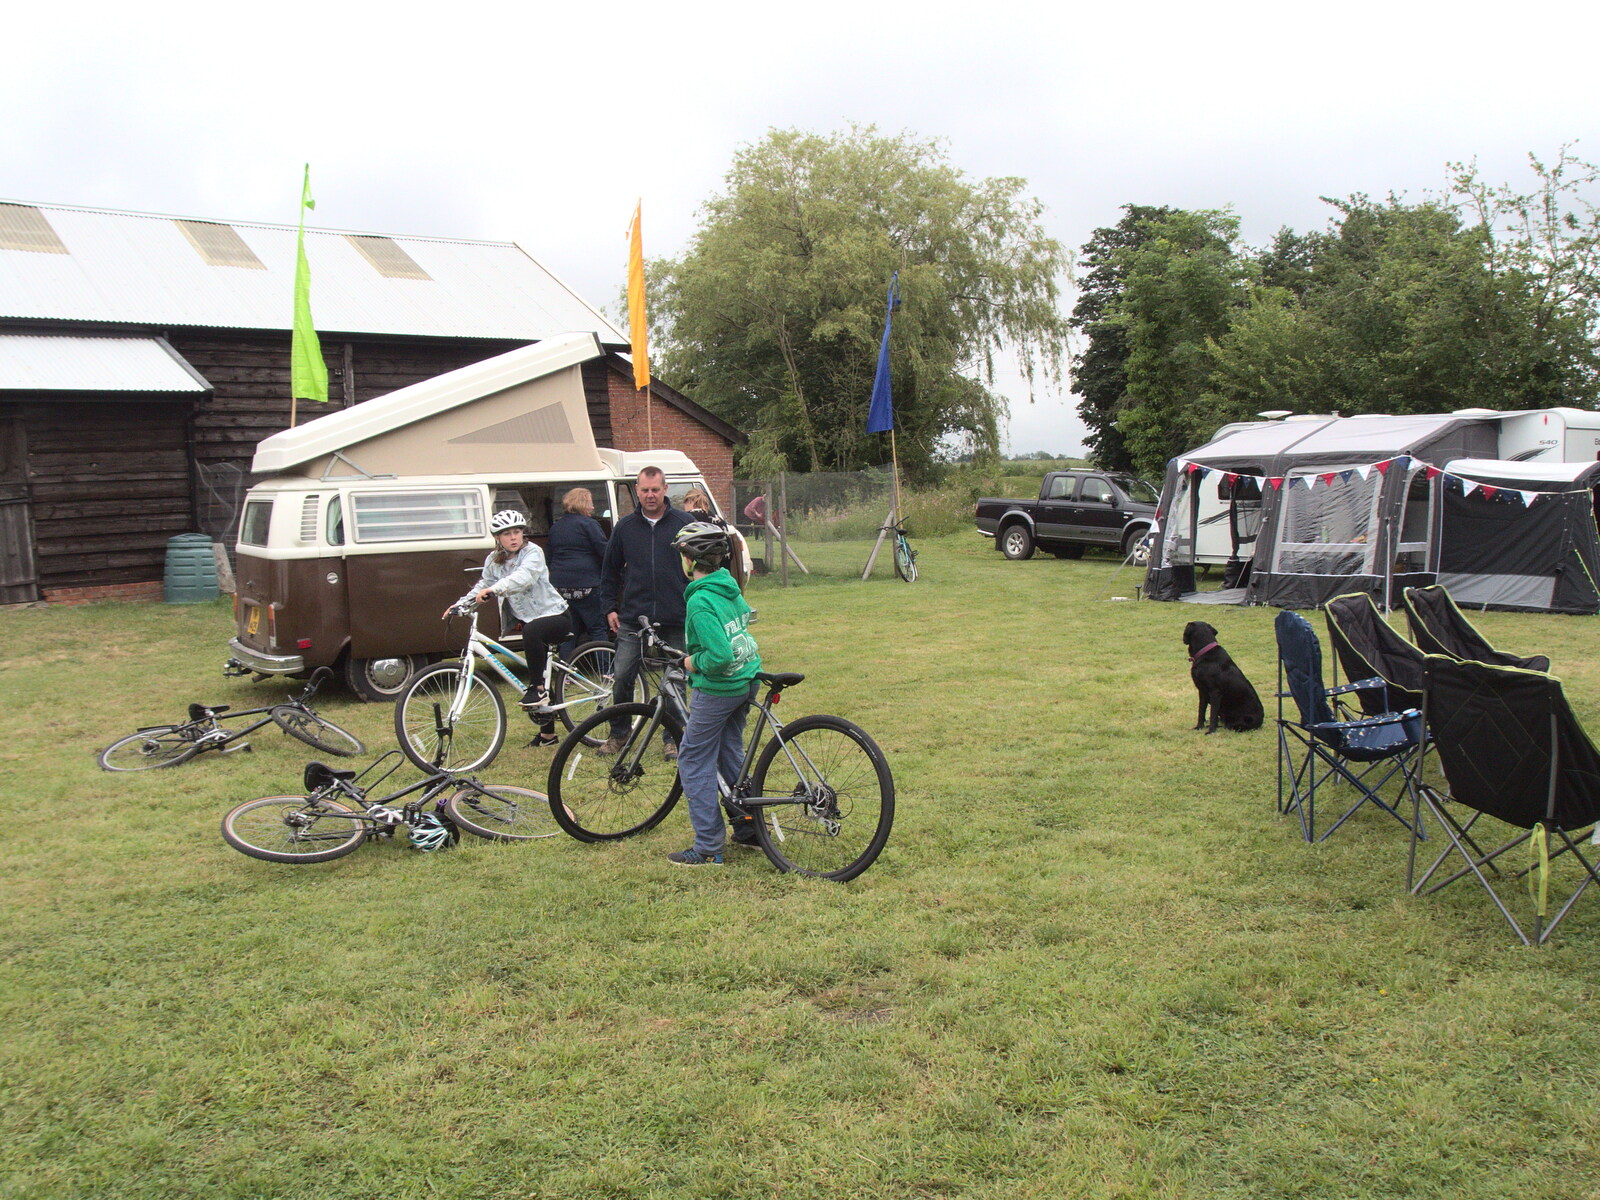 We assemble for a bike ride into Eye from Suze-fest, Braisworth, Suffolk - 19th June 2021